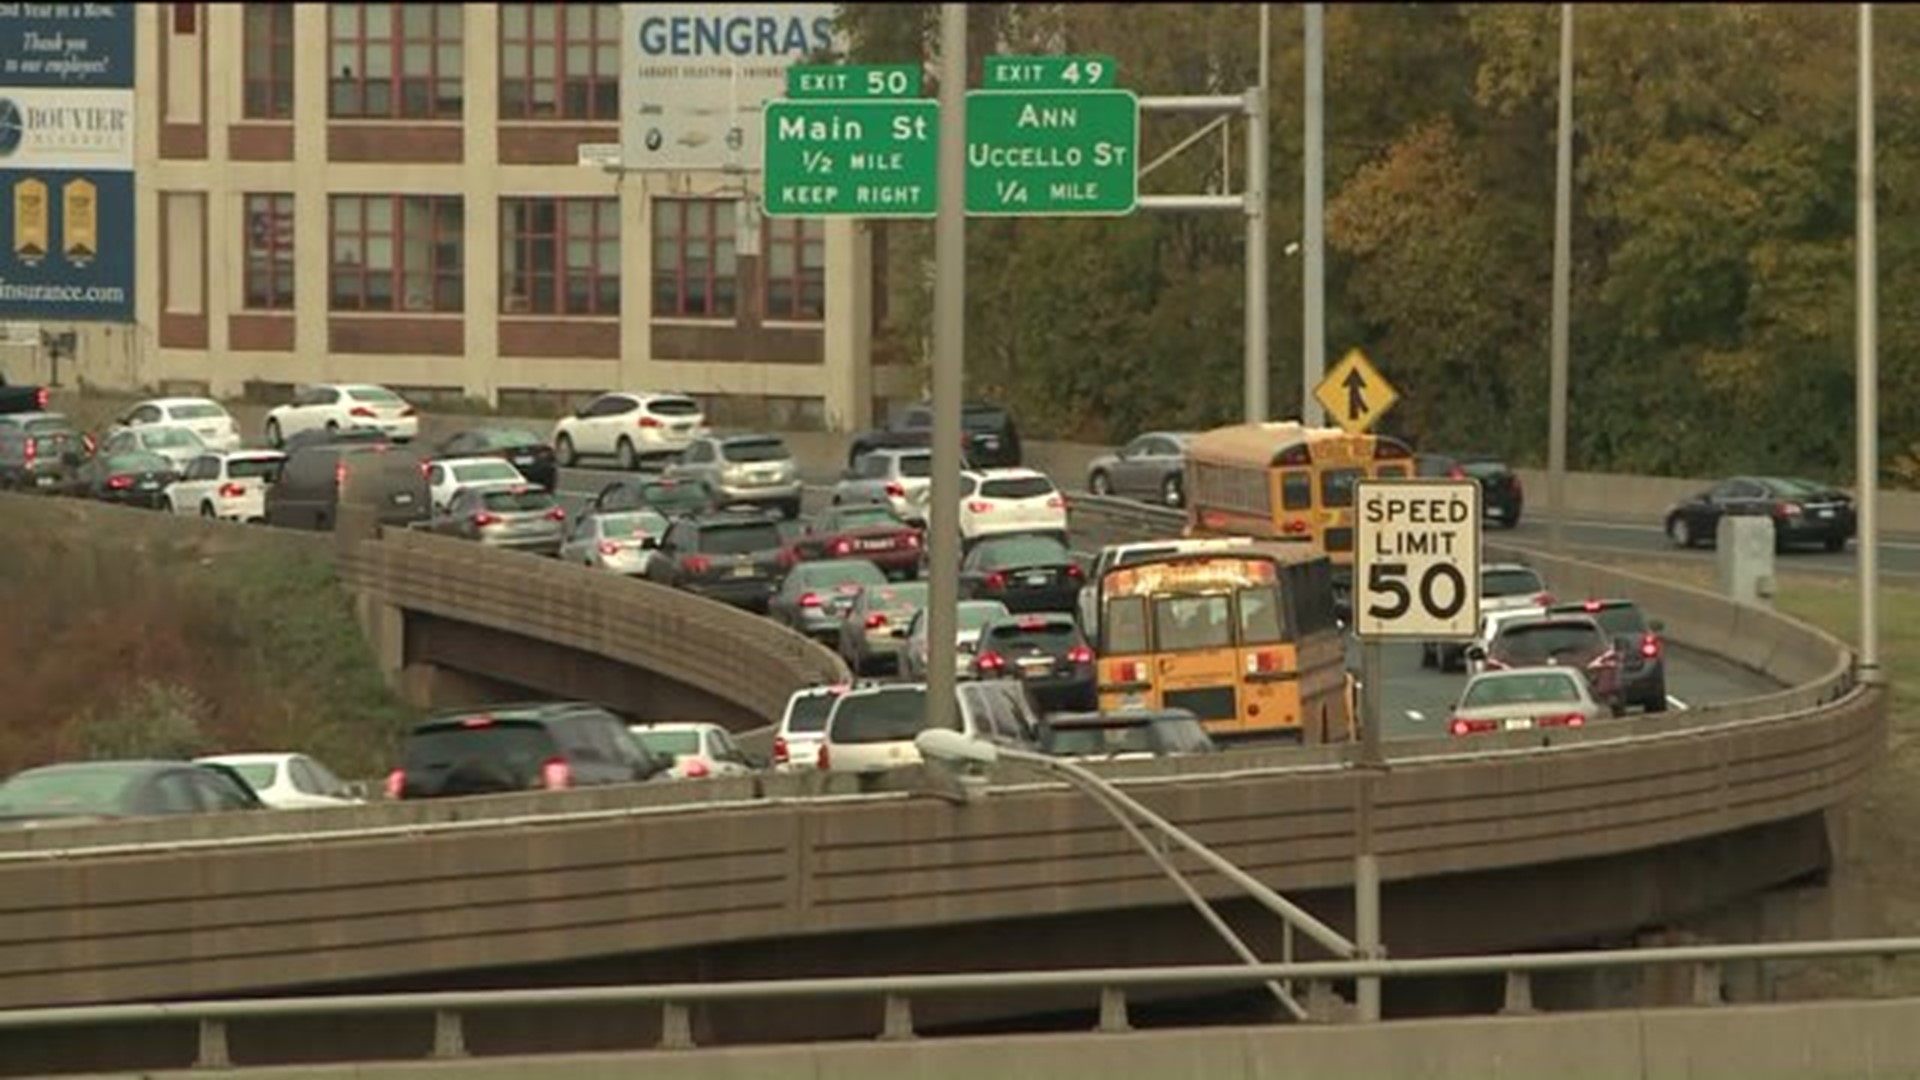 Plans to improve I-84 in Hartford discussed among residents